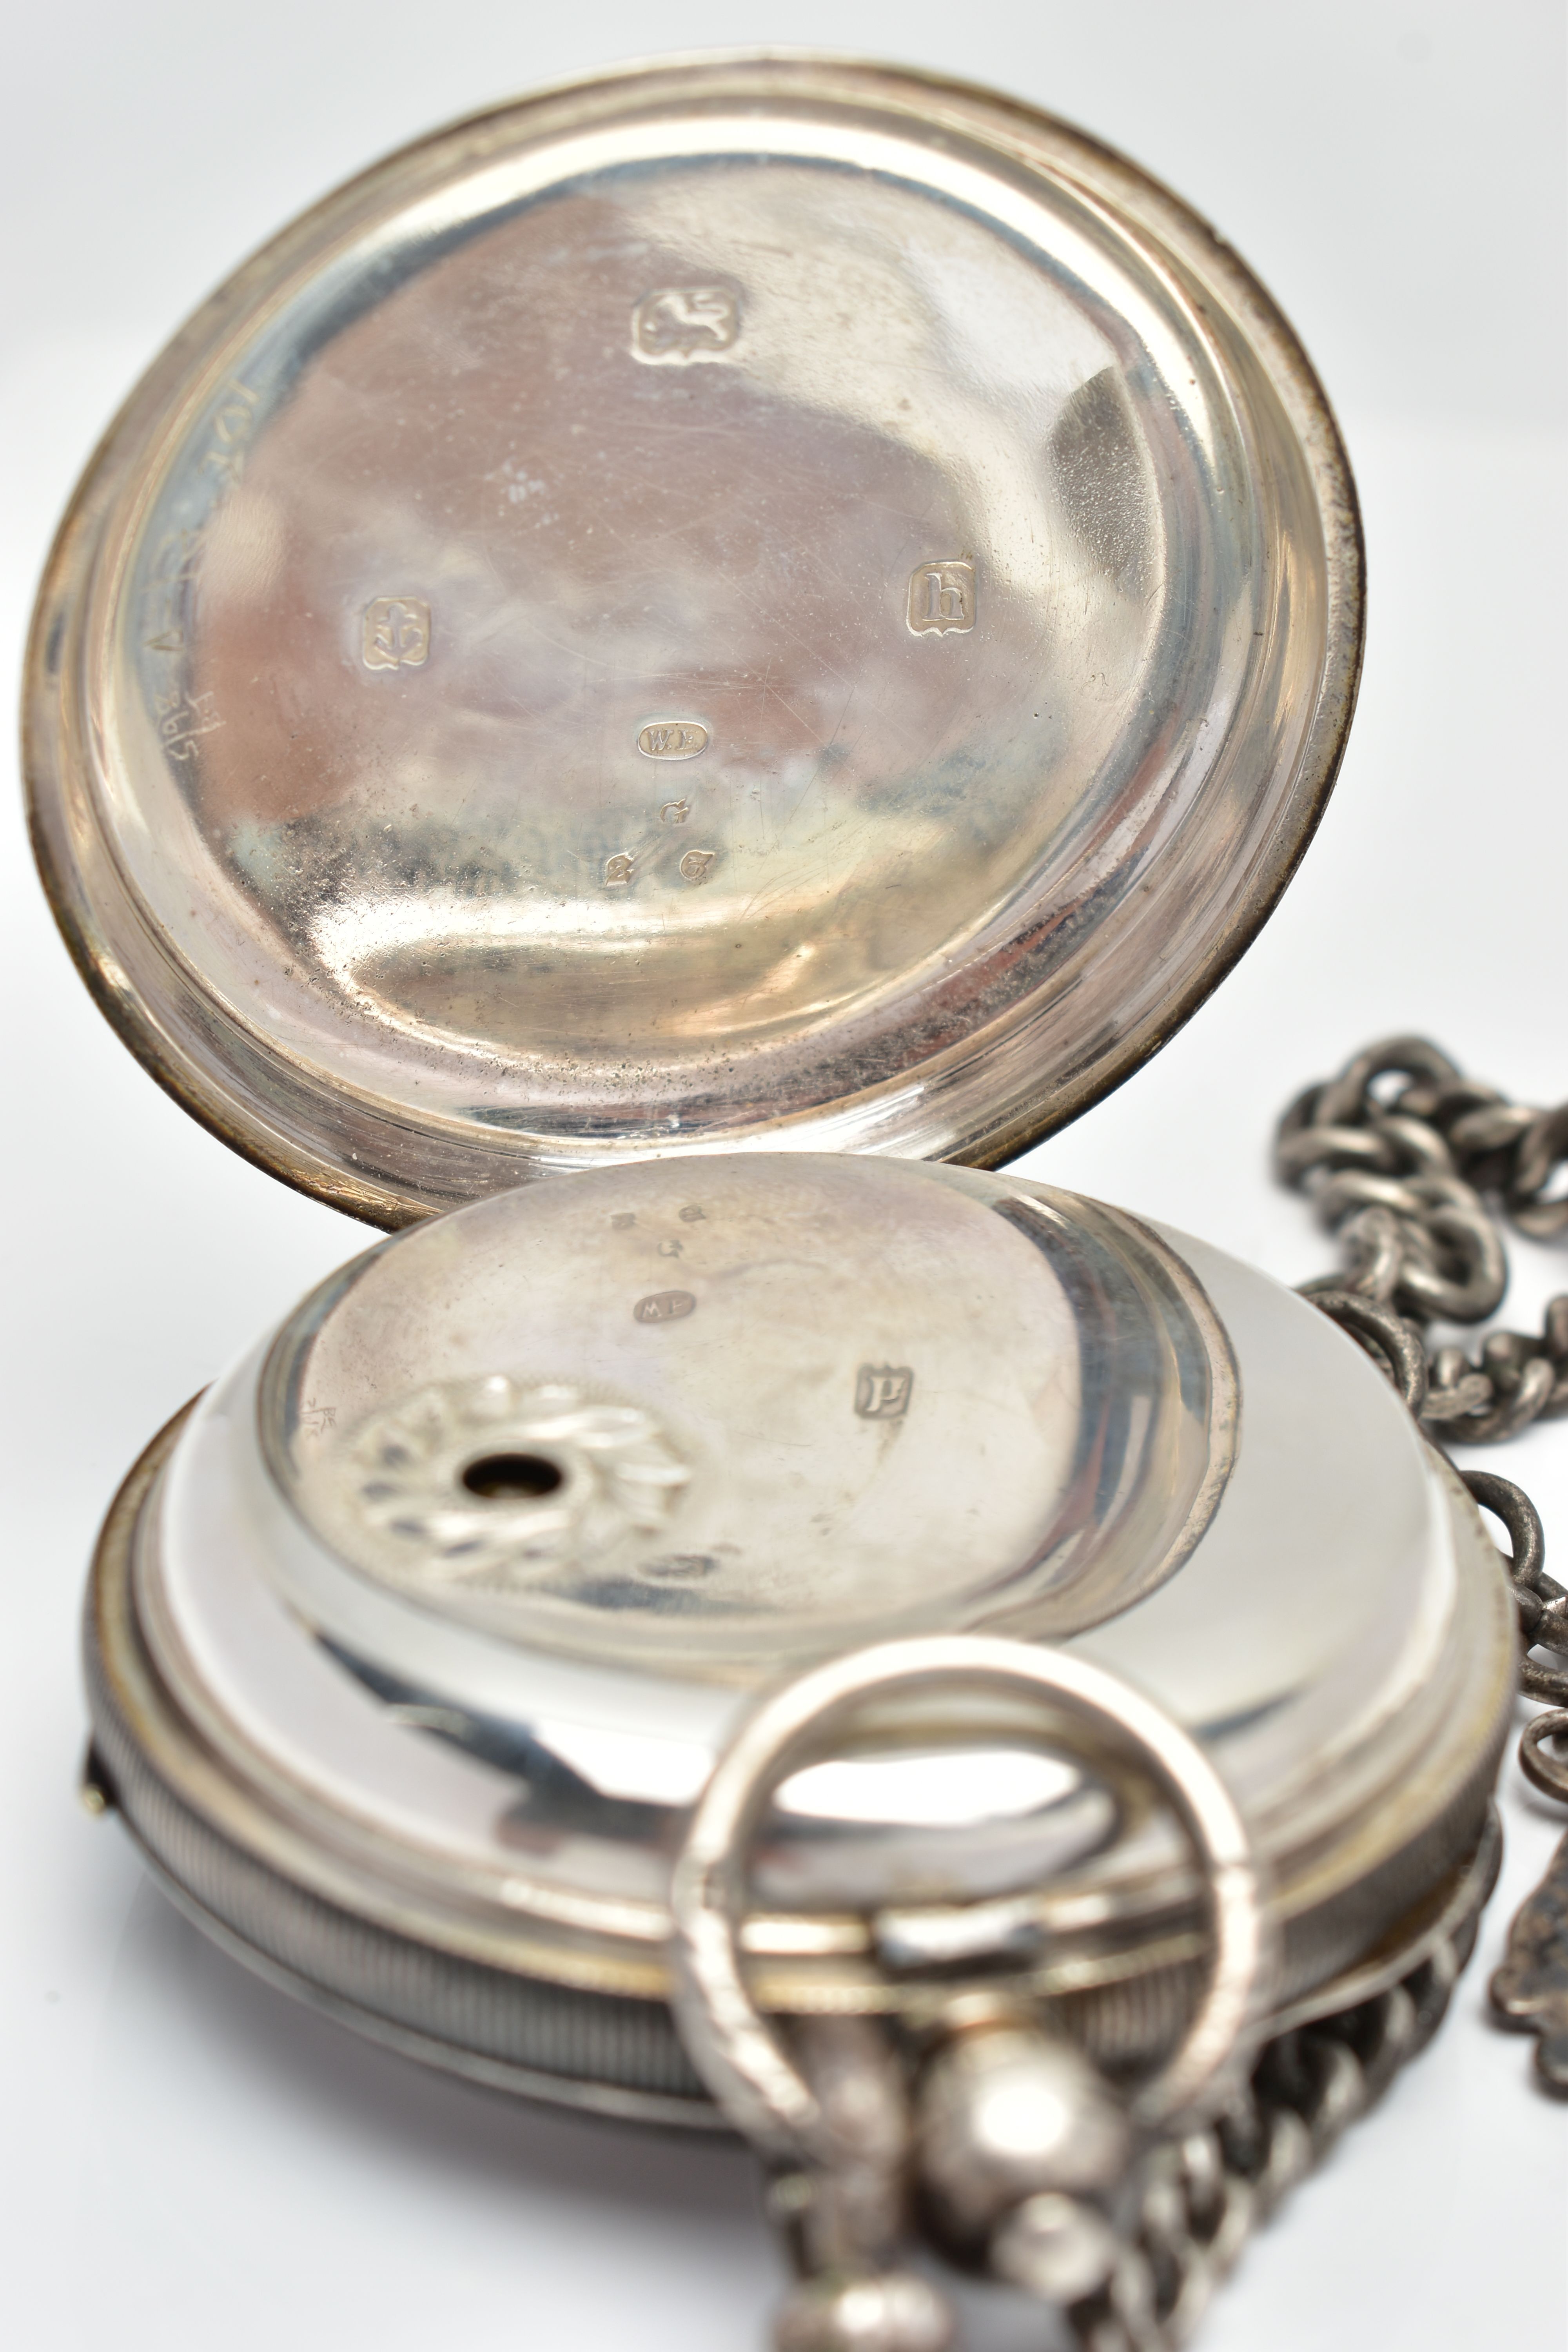 AN EARLY 20TH CENTURY OPEN FACE POCKET WATCH AND ALBERT CHAIN, the key wound pocket watch with a - Image 5 of 8